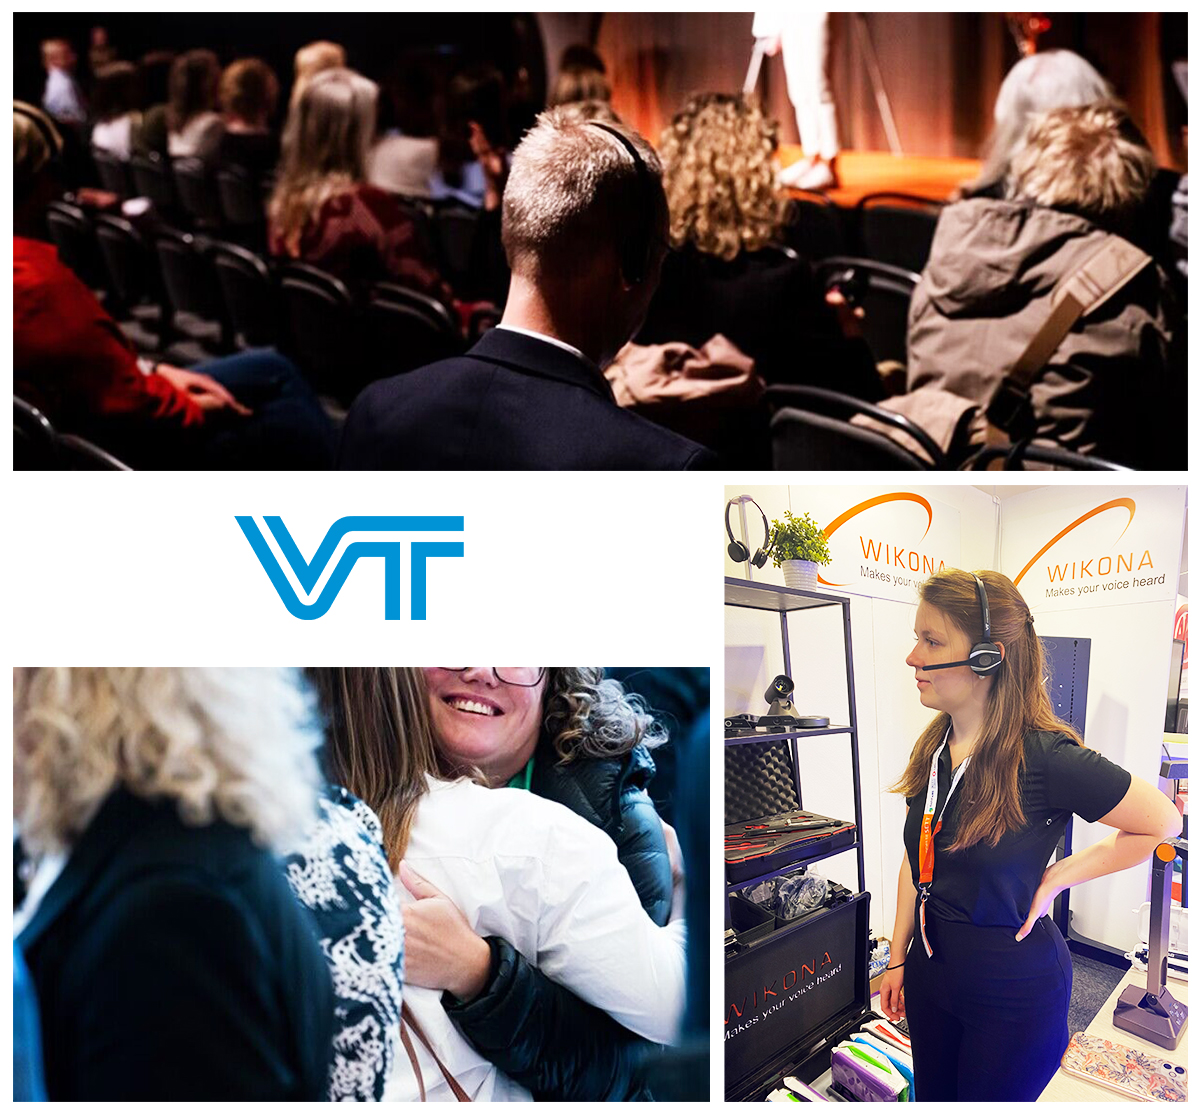 VT Swedish Distributor participate in  SETT event with VT Communication Solutions